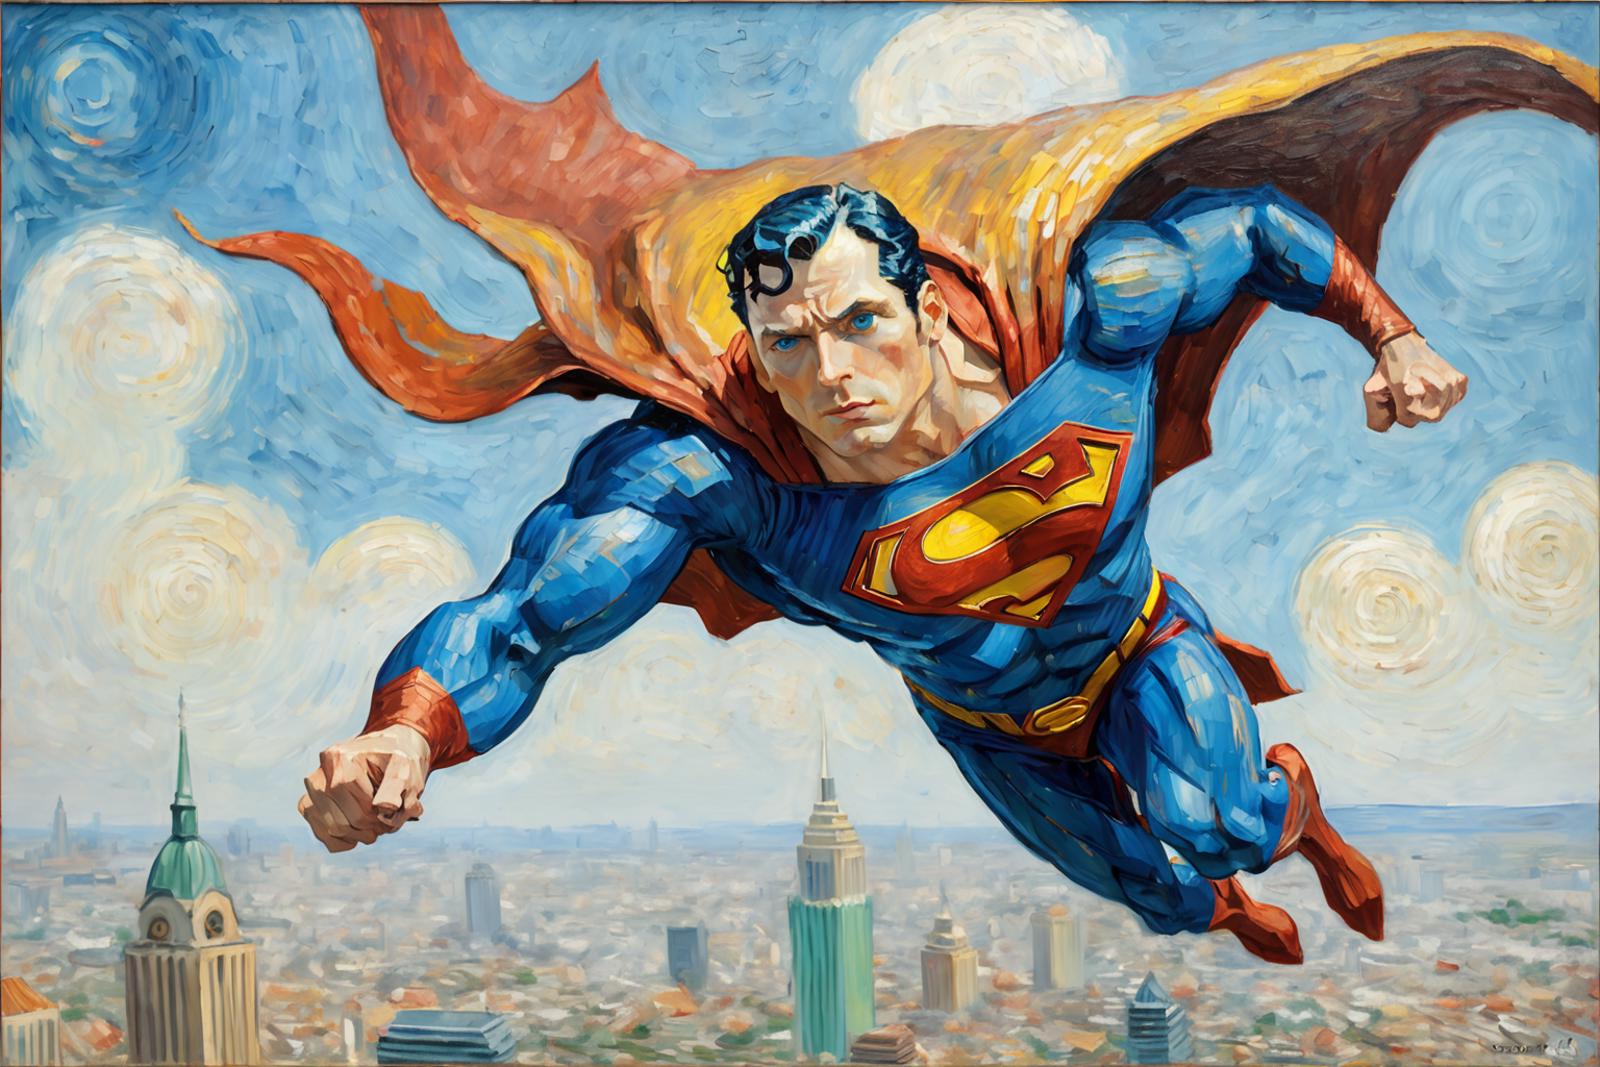 A Superman painting with the city skyline in the background.